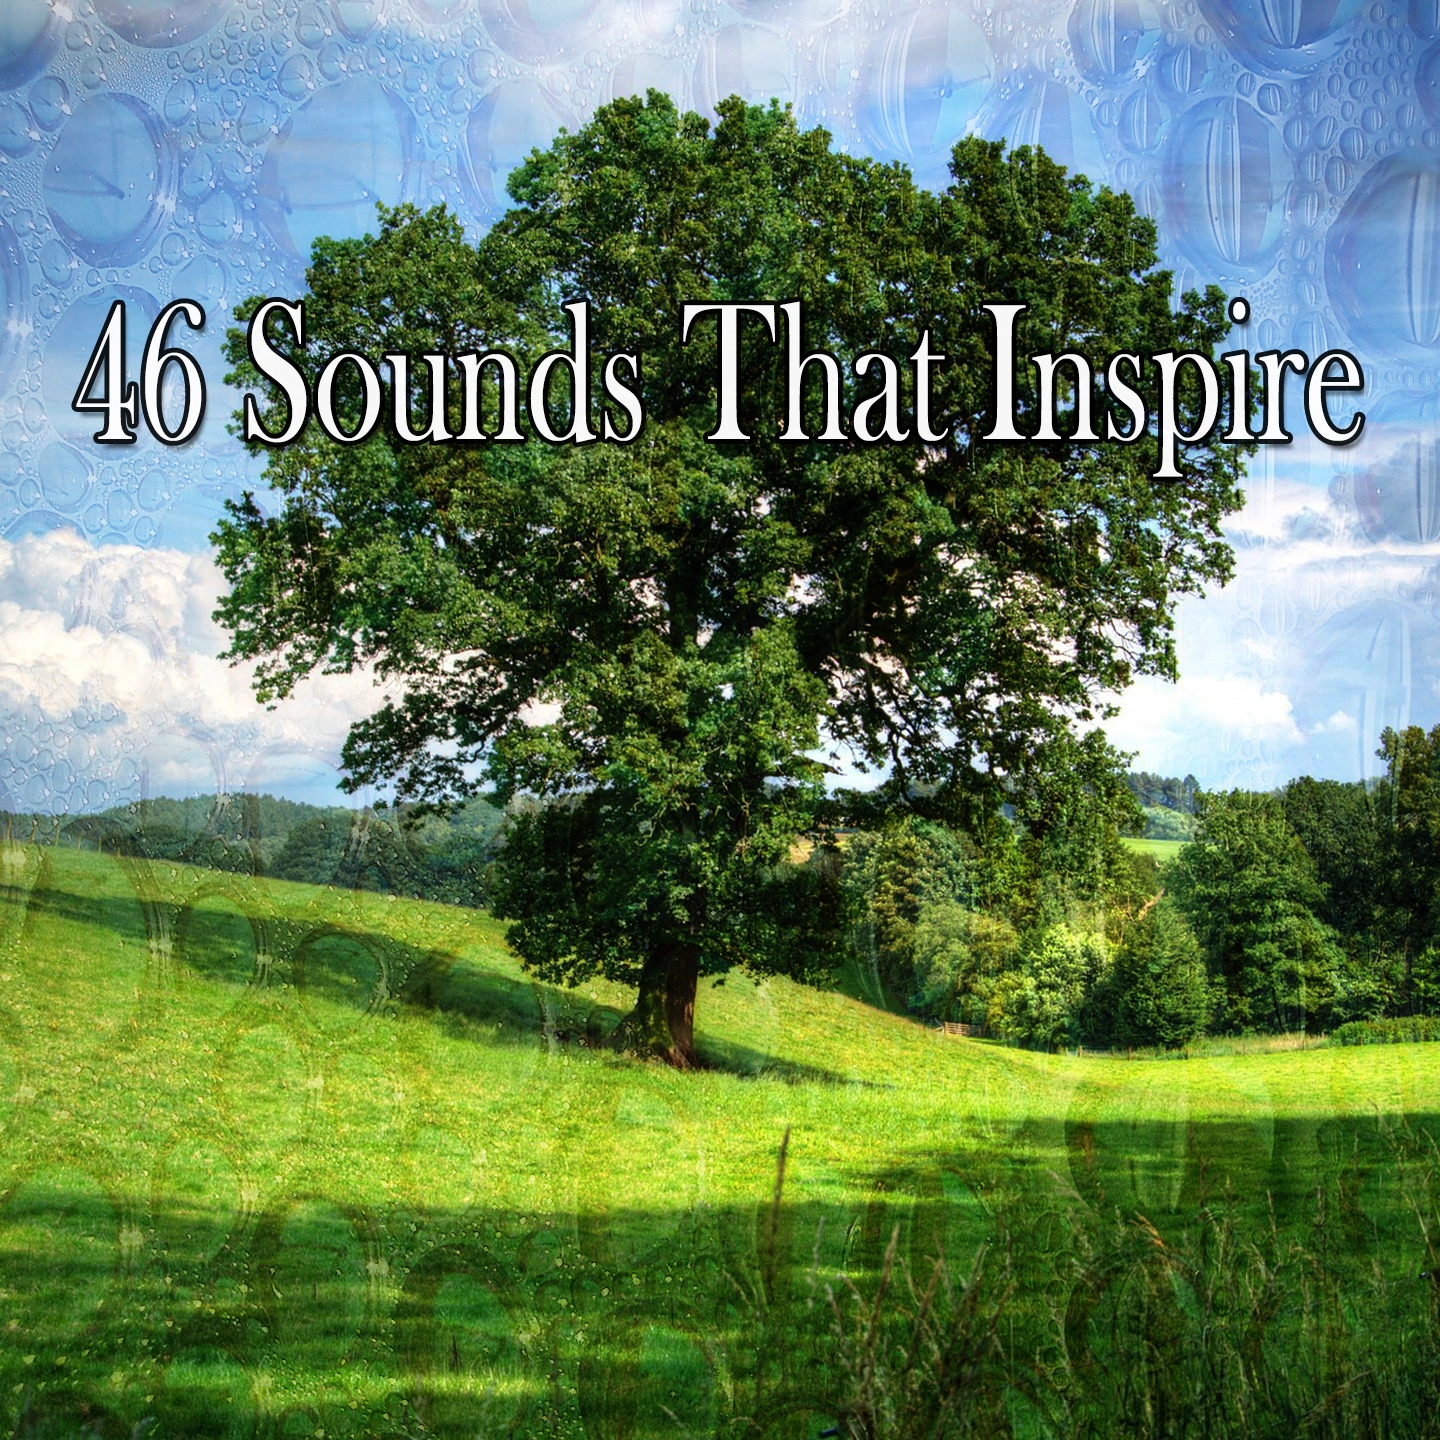 46 Sounds That Inspire